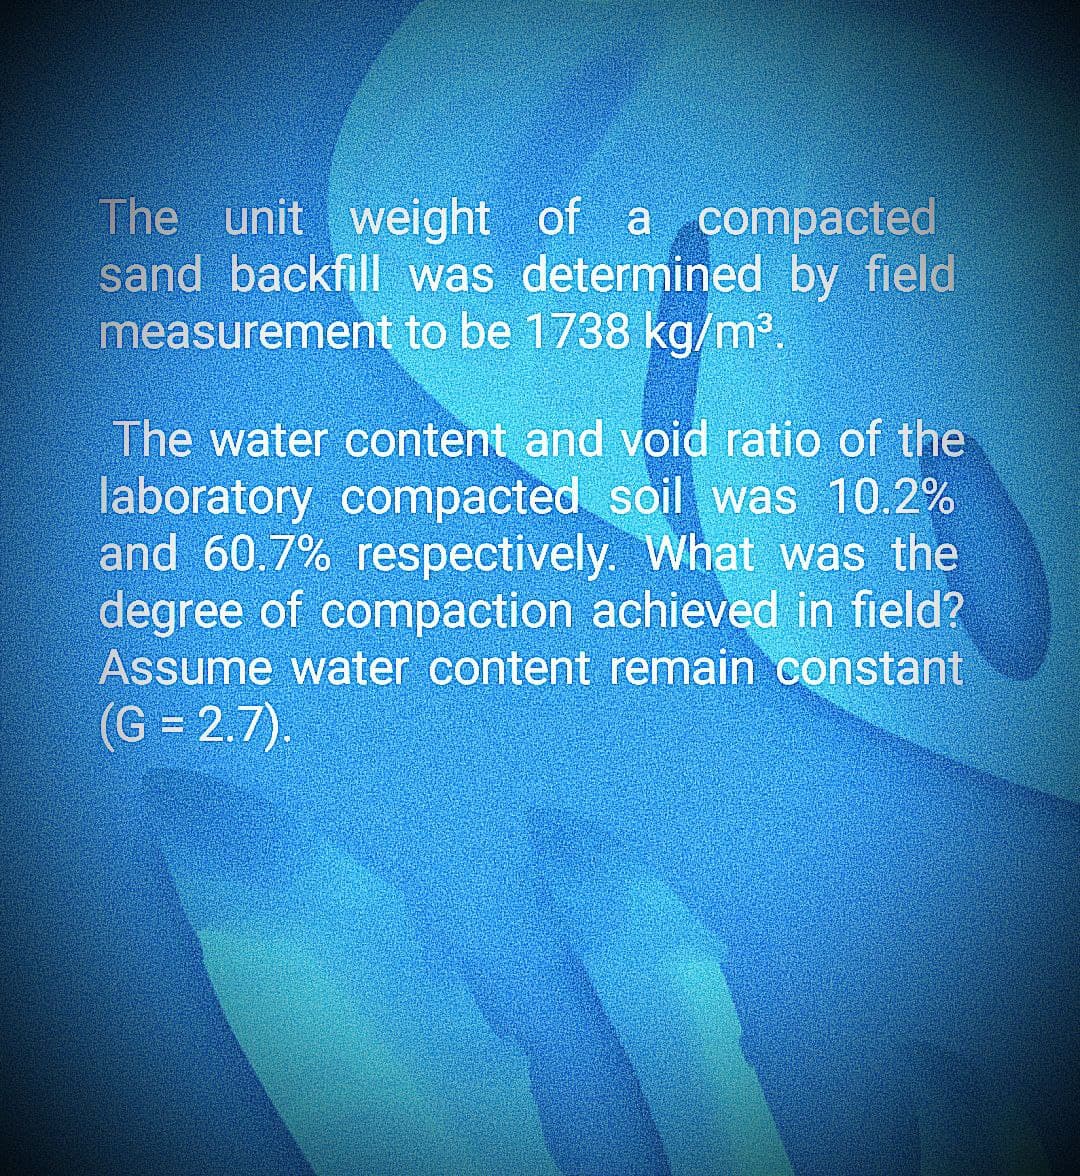 The unit weight of a compacted
sand backfill was determined by field
measurement to be 1738 kg/m³.
The water content and void ratio of the
laboratory compacted soil was 10.2%
and 60.7% respectively. What was the
degree of compaction achieved in field?
Assume water content remain constant
(G = 2.7).